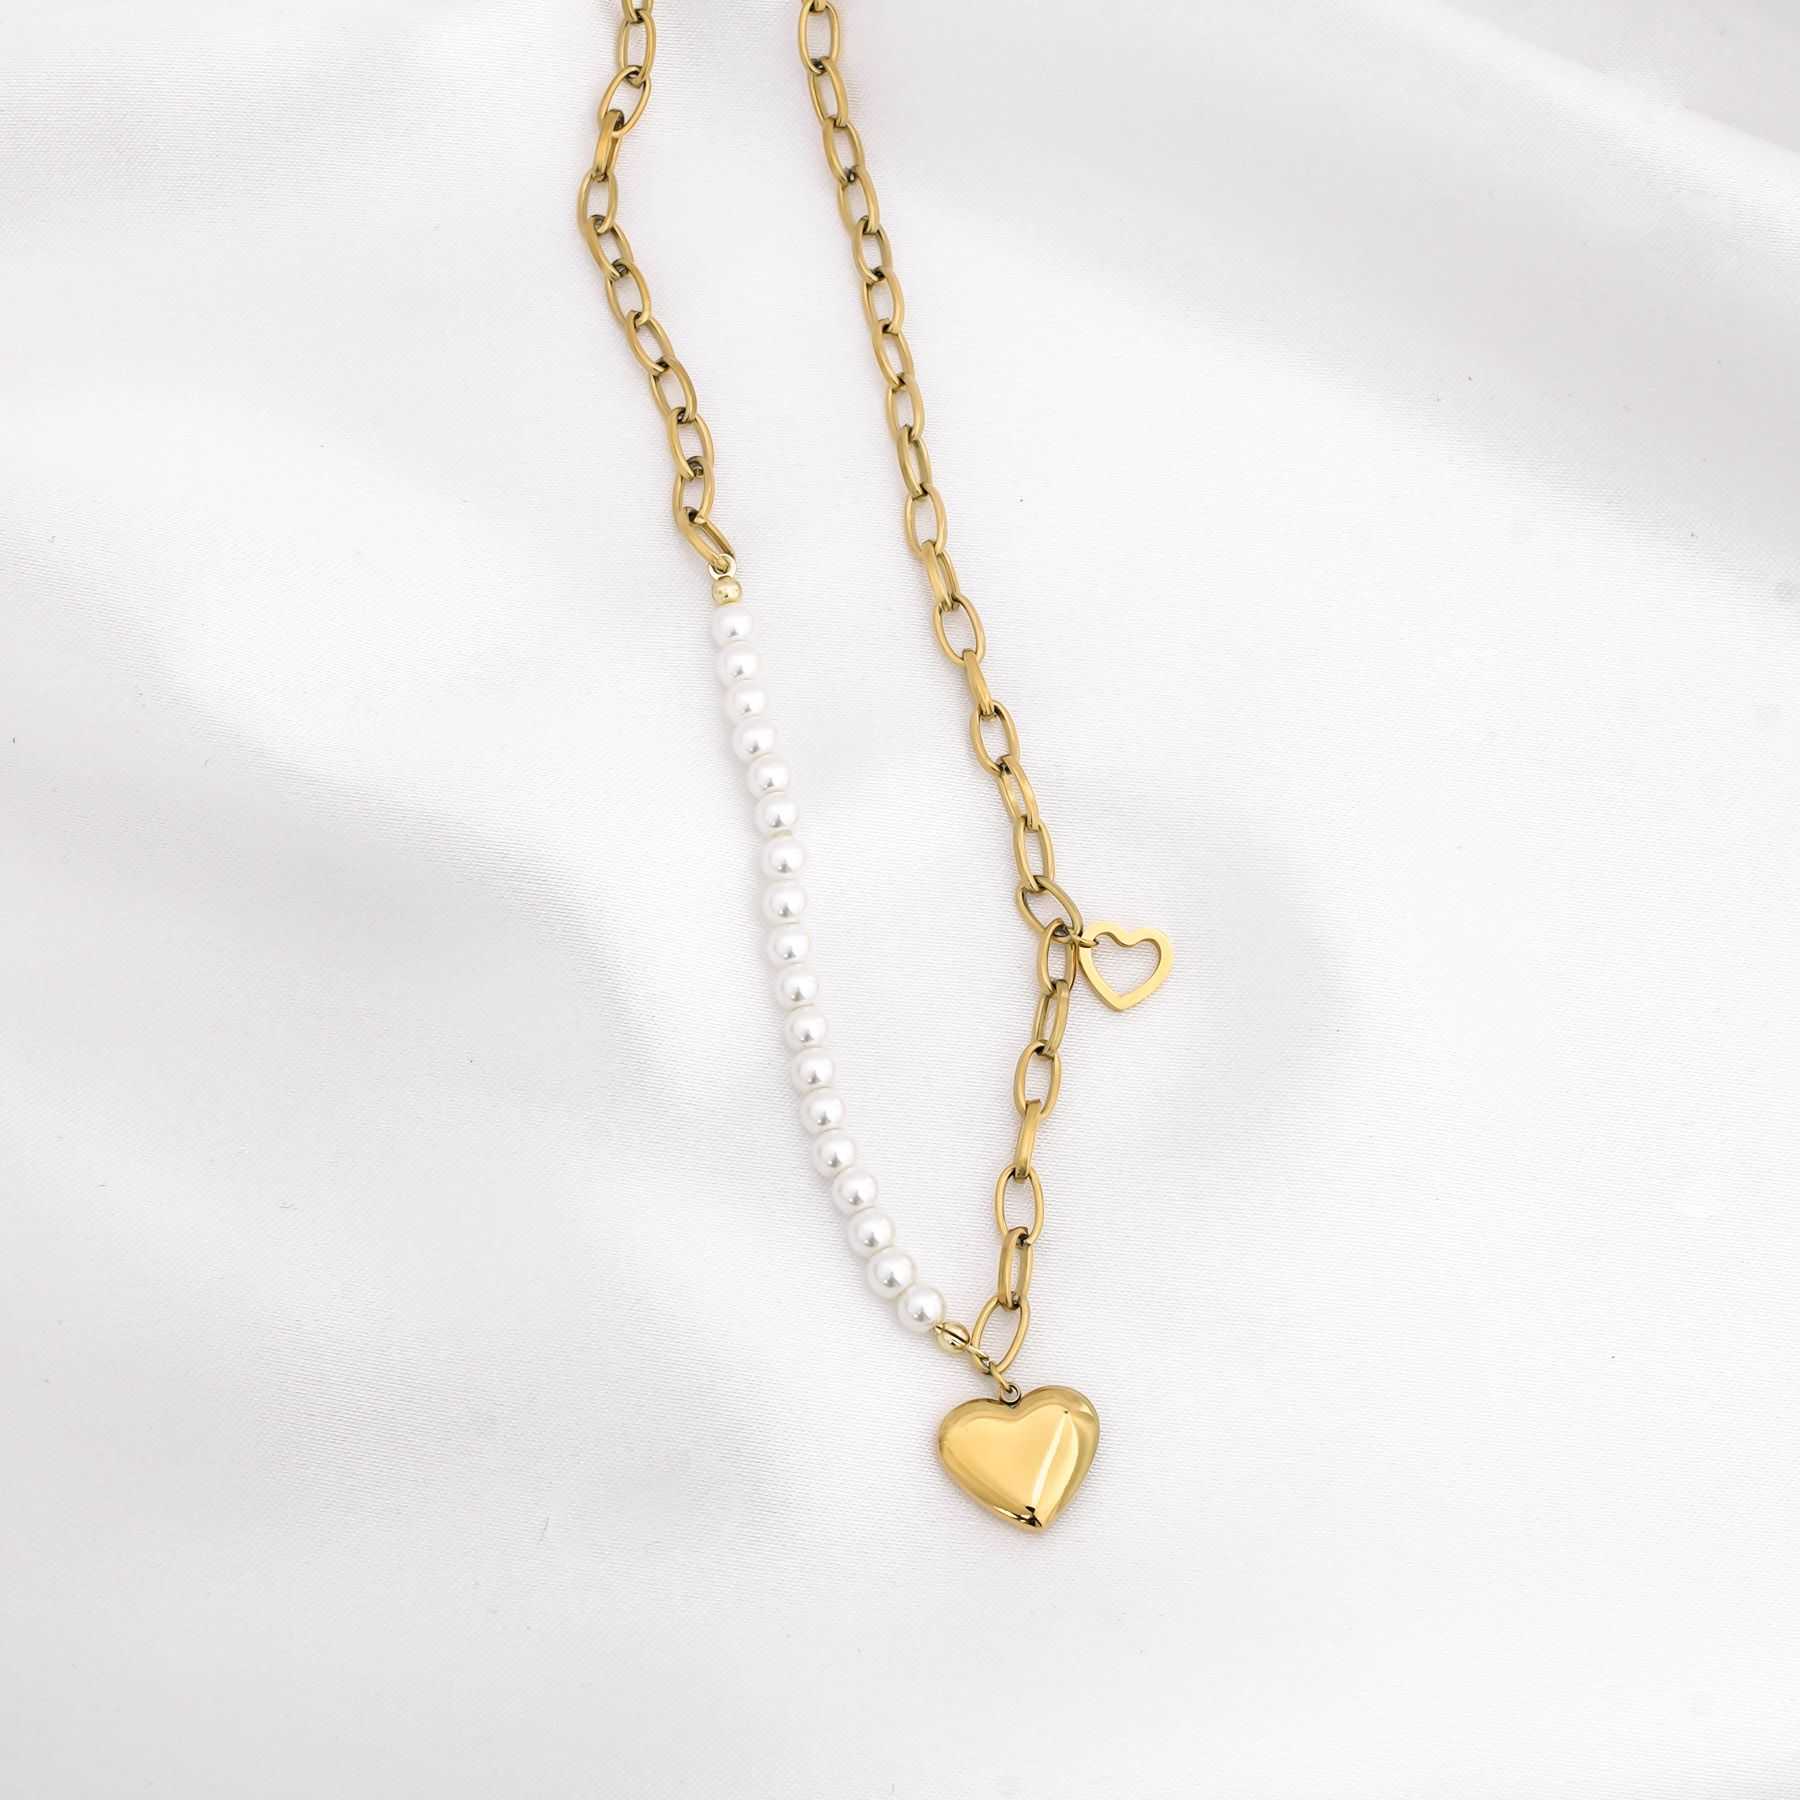 HEART AND SOUL NECKLACE - GOLD